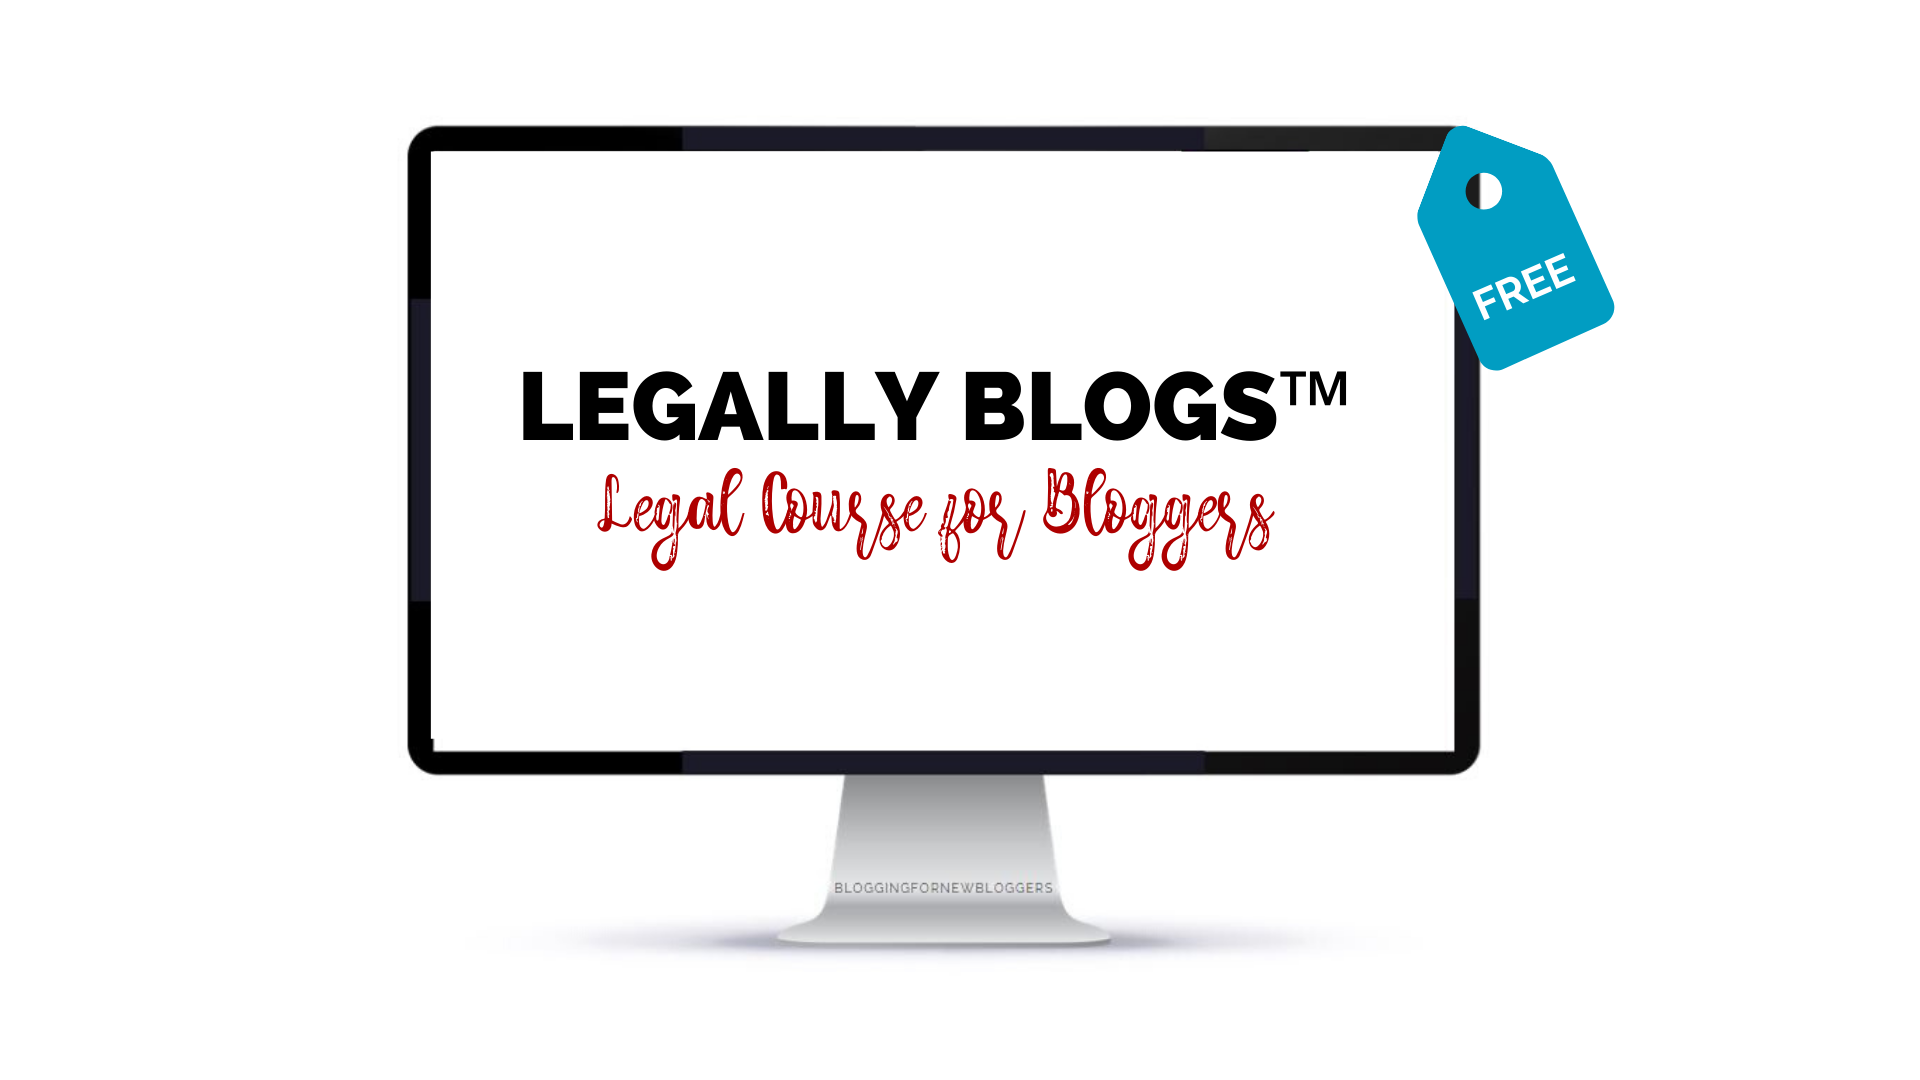 Legally Blogs free legal course for bloggers